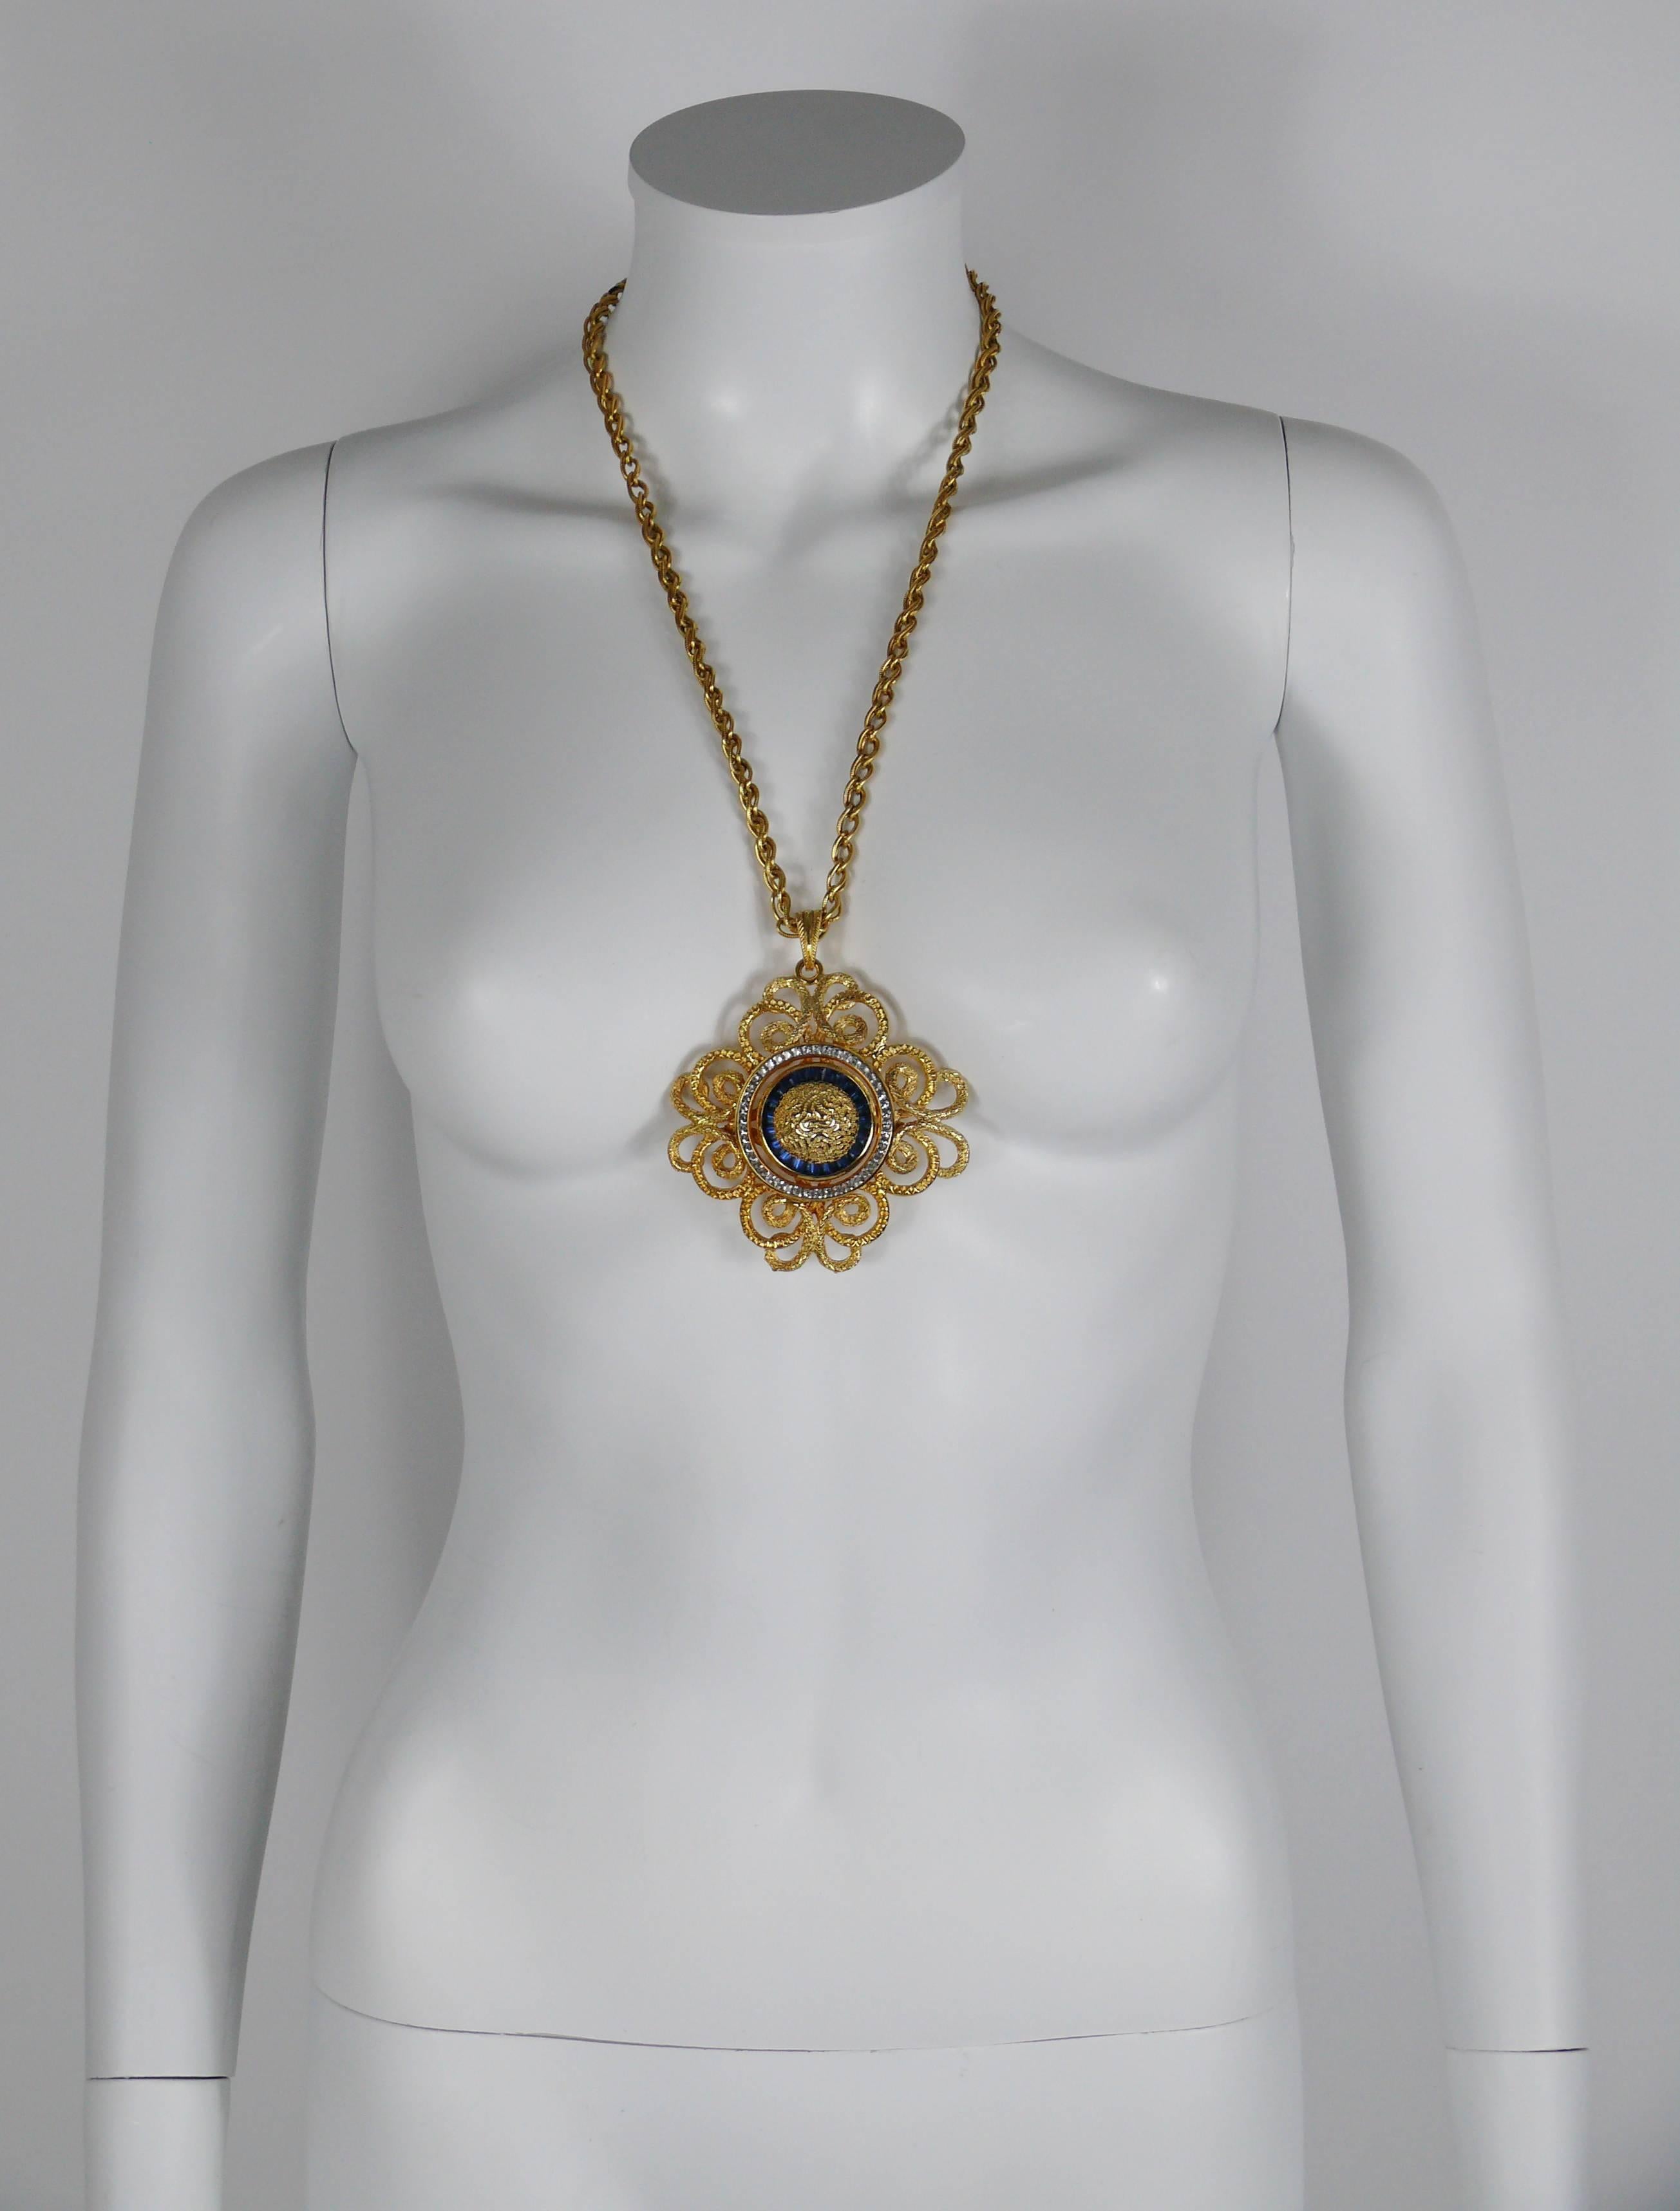 LUCIEN PICCARD vintage gold toned necklace featuring a massive openwork pendant embellished with diamante and faux sapphires.

Embossed LUCIEN PICCARD.
Numbered 113H.

Indicative measurements : length worn approx. 35 cm (13.78 inches) / pendant